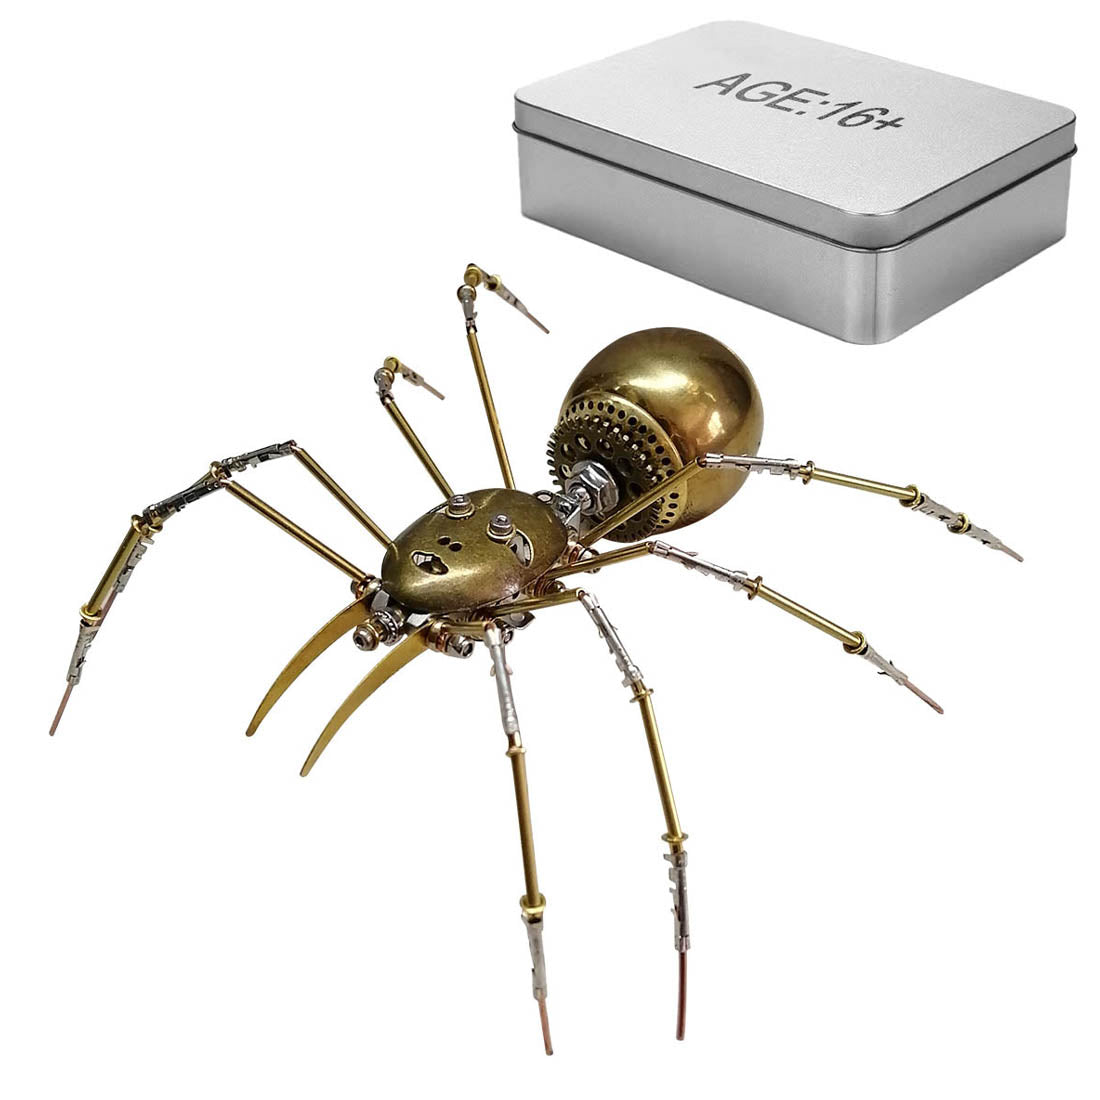 3D Metal Puzzle Human-faced Spider Mechanical Insect Assembly Model 130+PCS